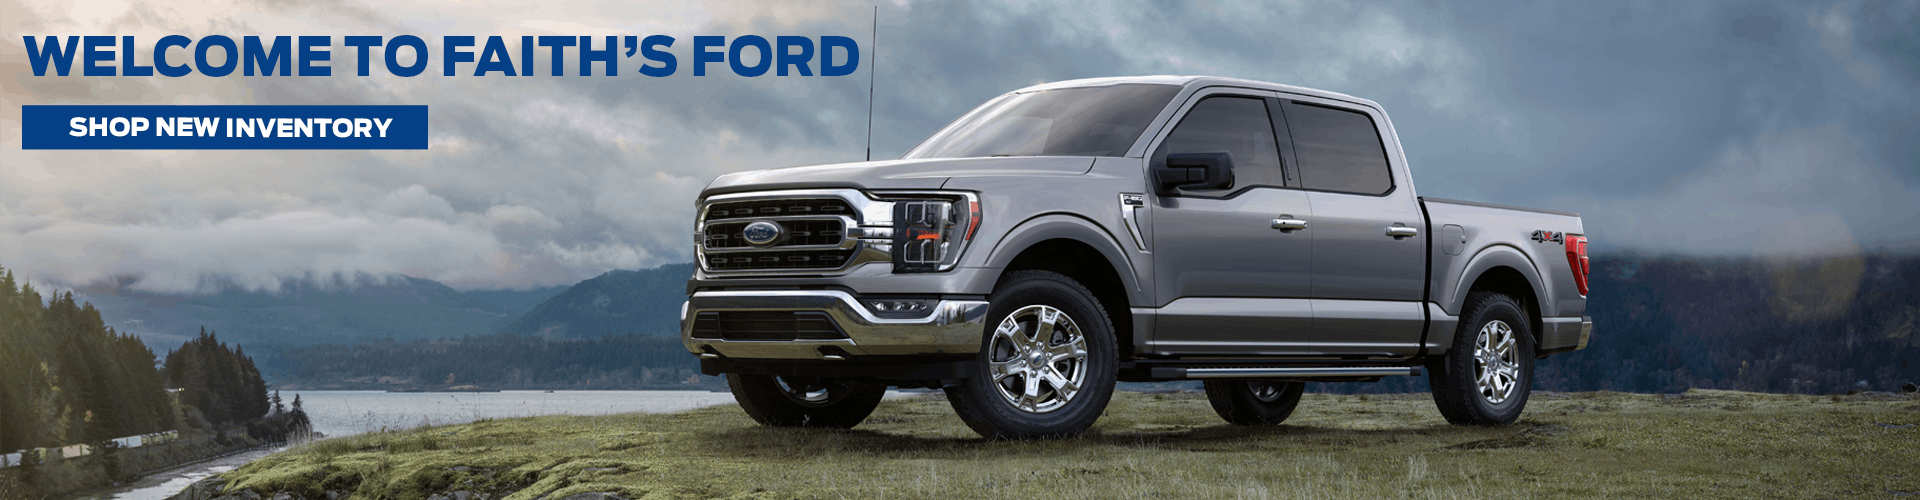 Welcome to Faith’s Ford